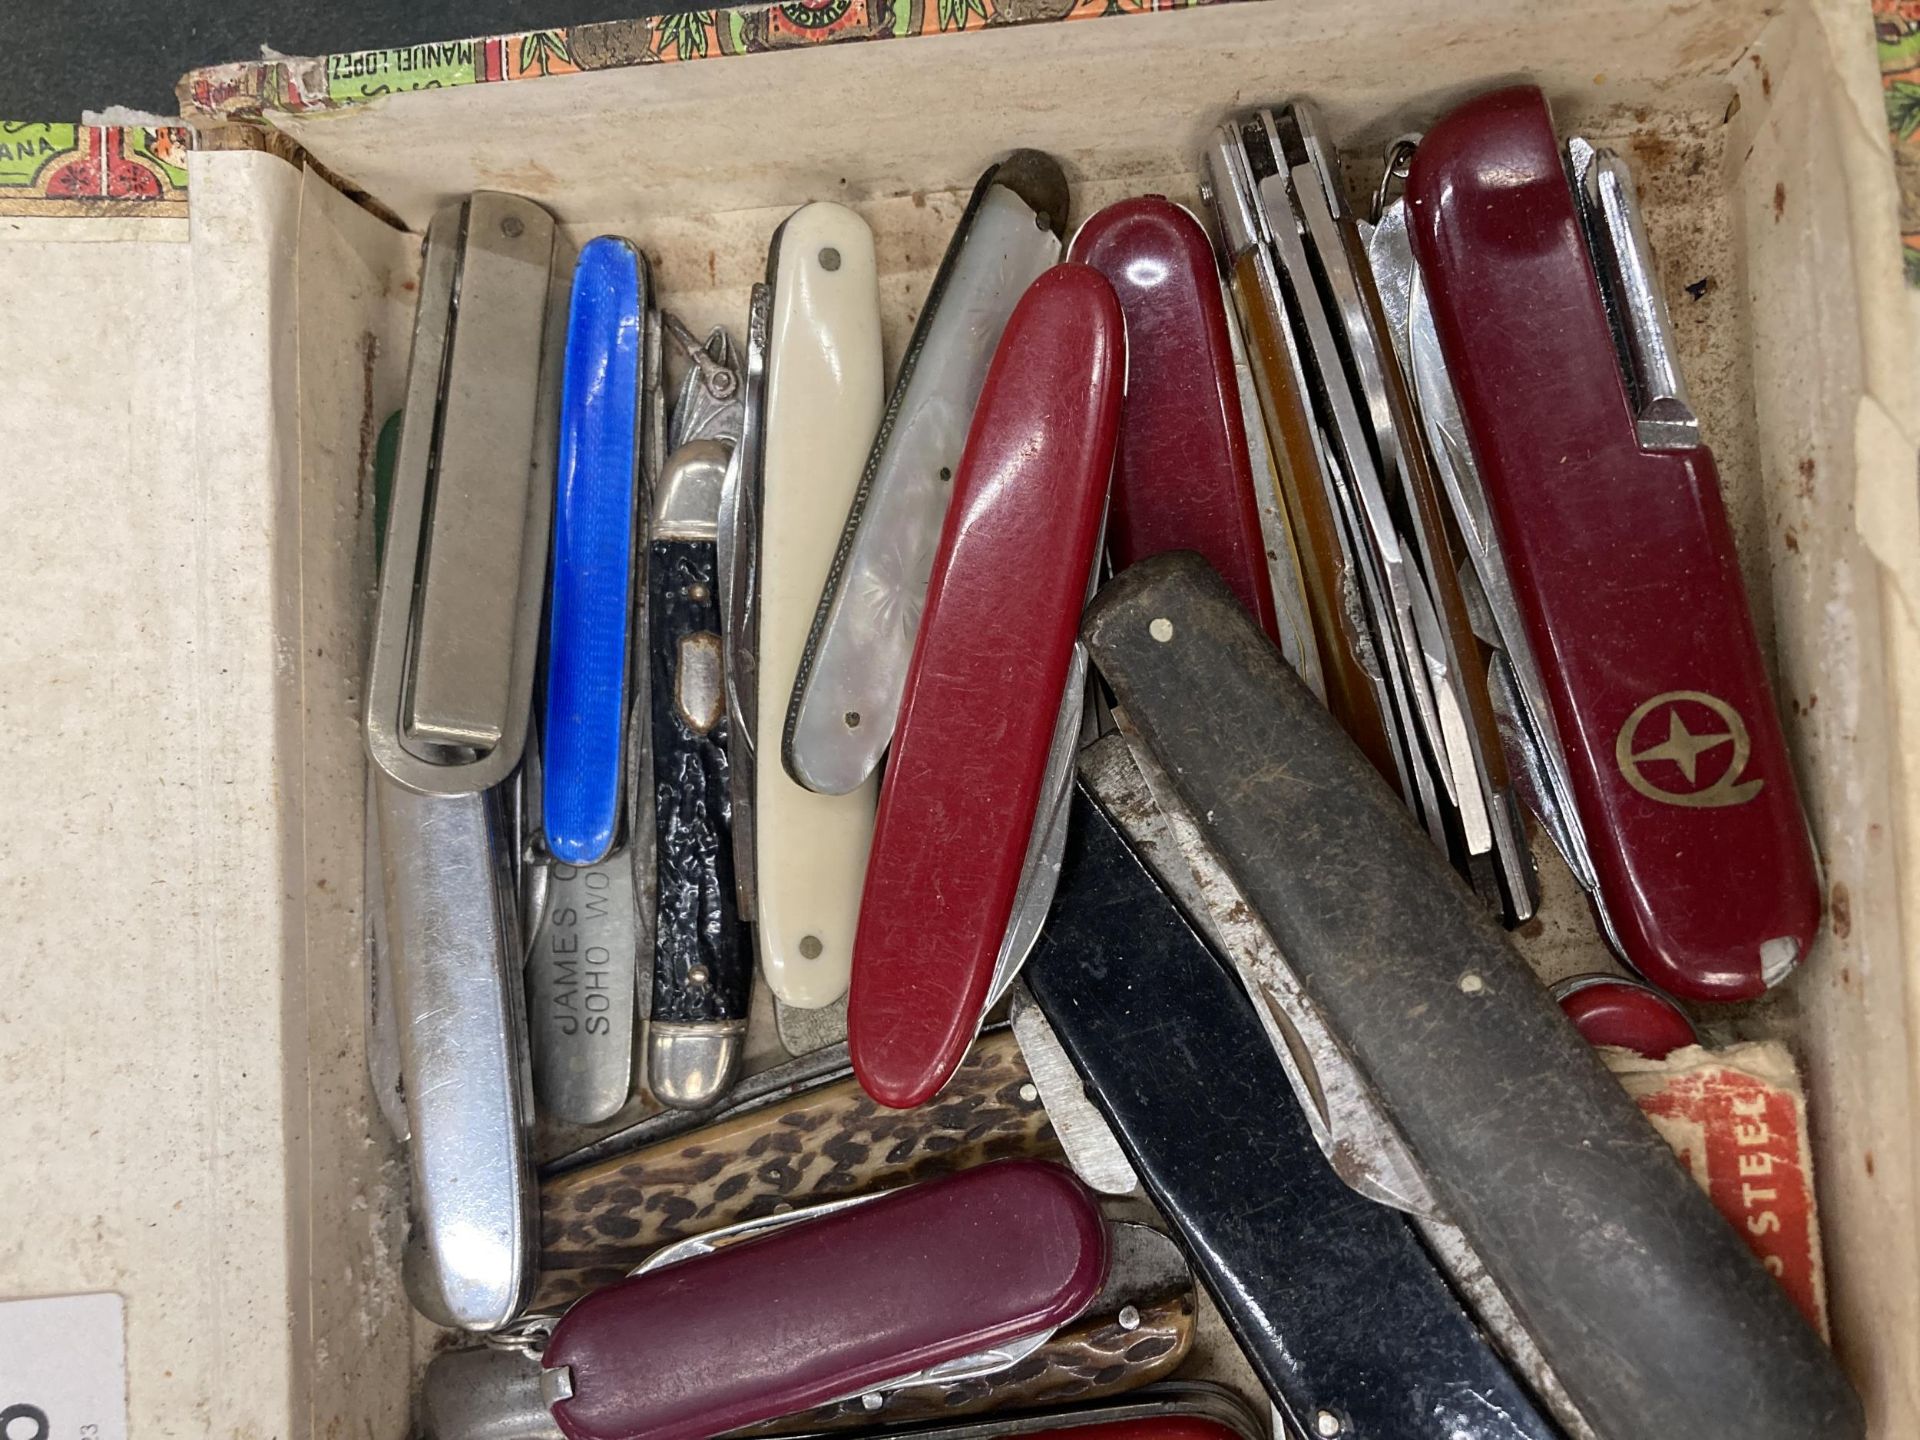 A BOX OF VINTAGE SWISS ARMY KNIVES - Image 2 of 4